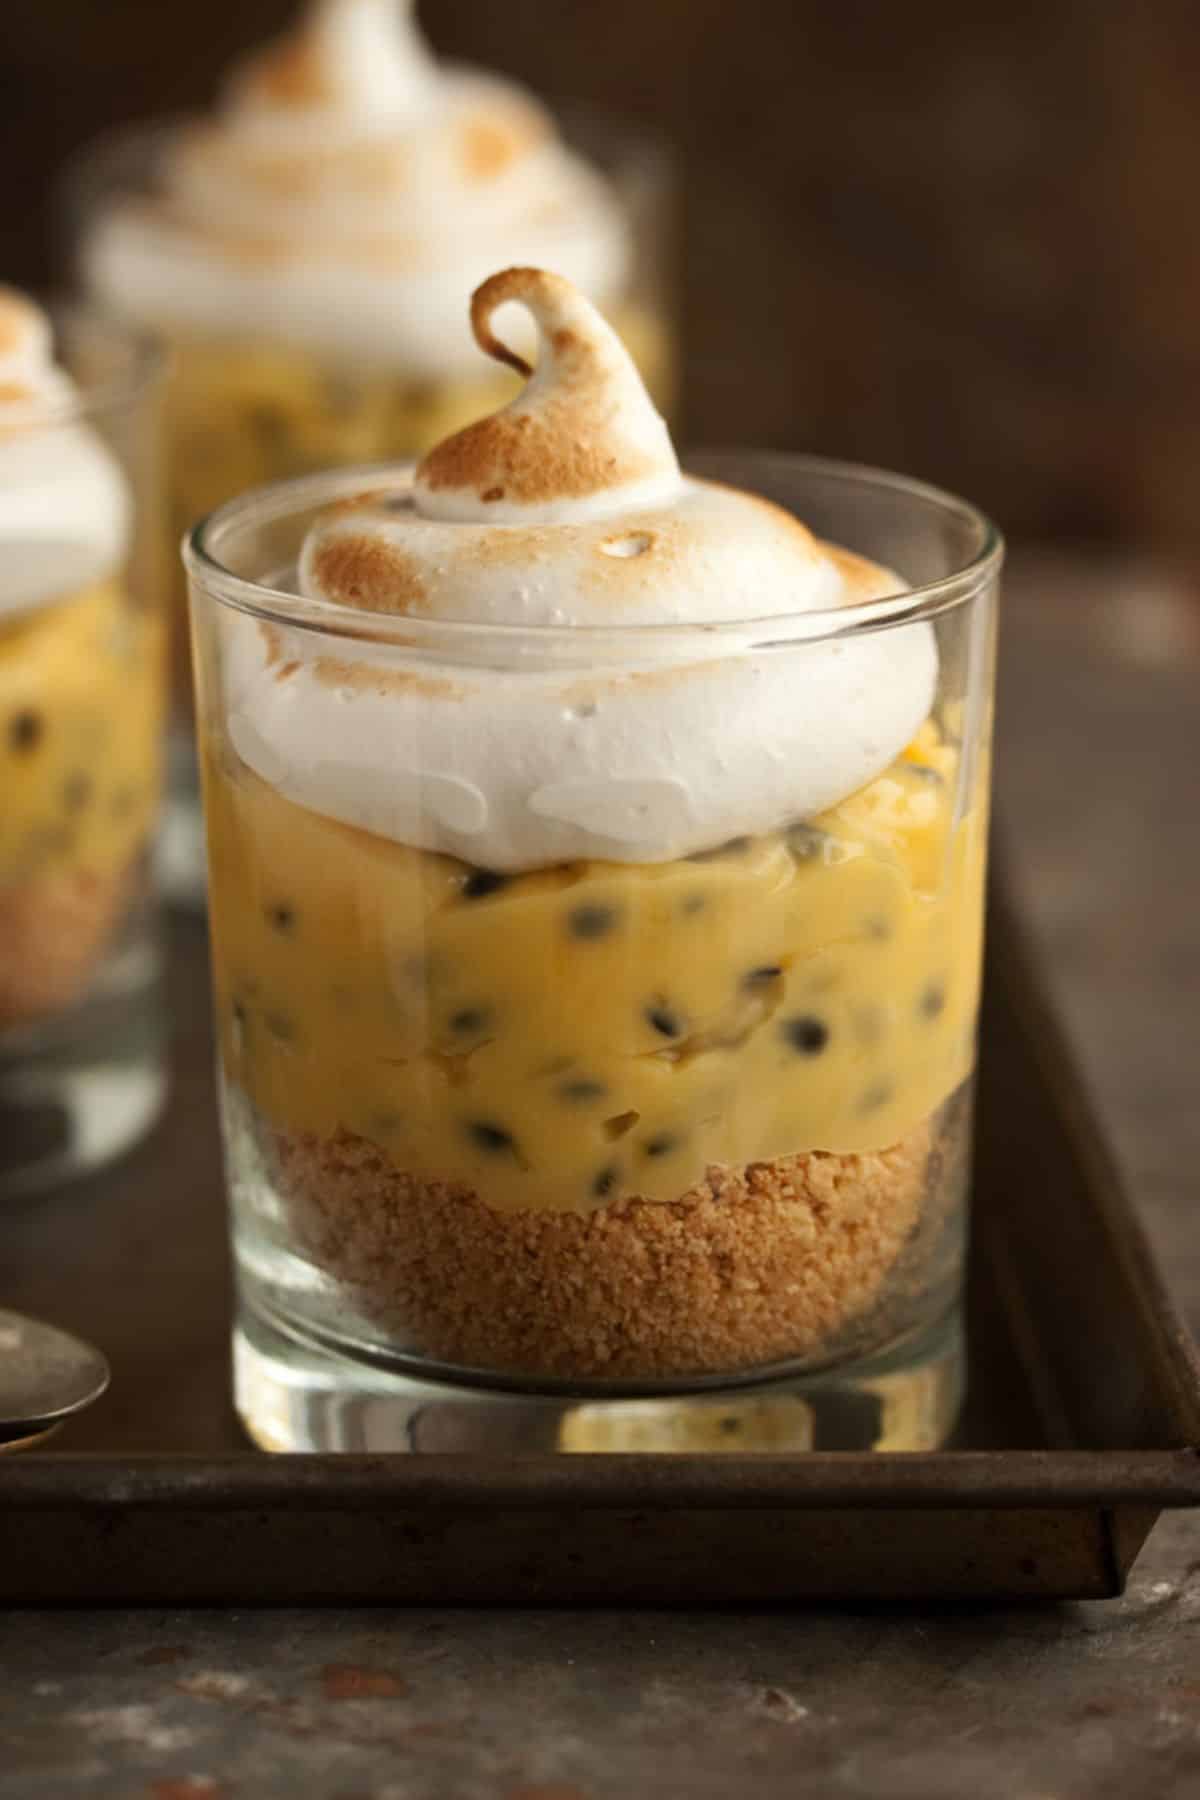 Mouth-watering passion fruit meringue pie in a glass cup.